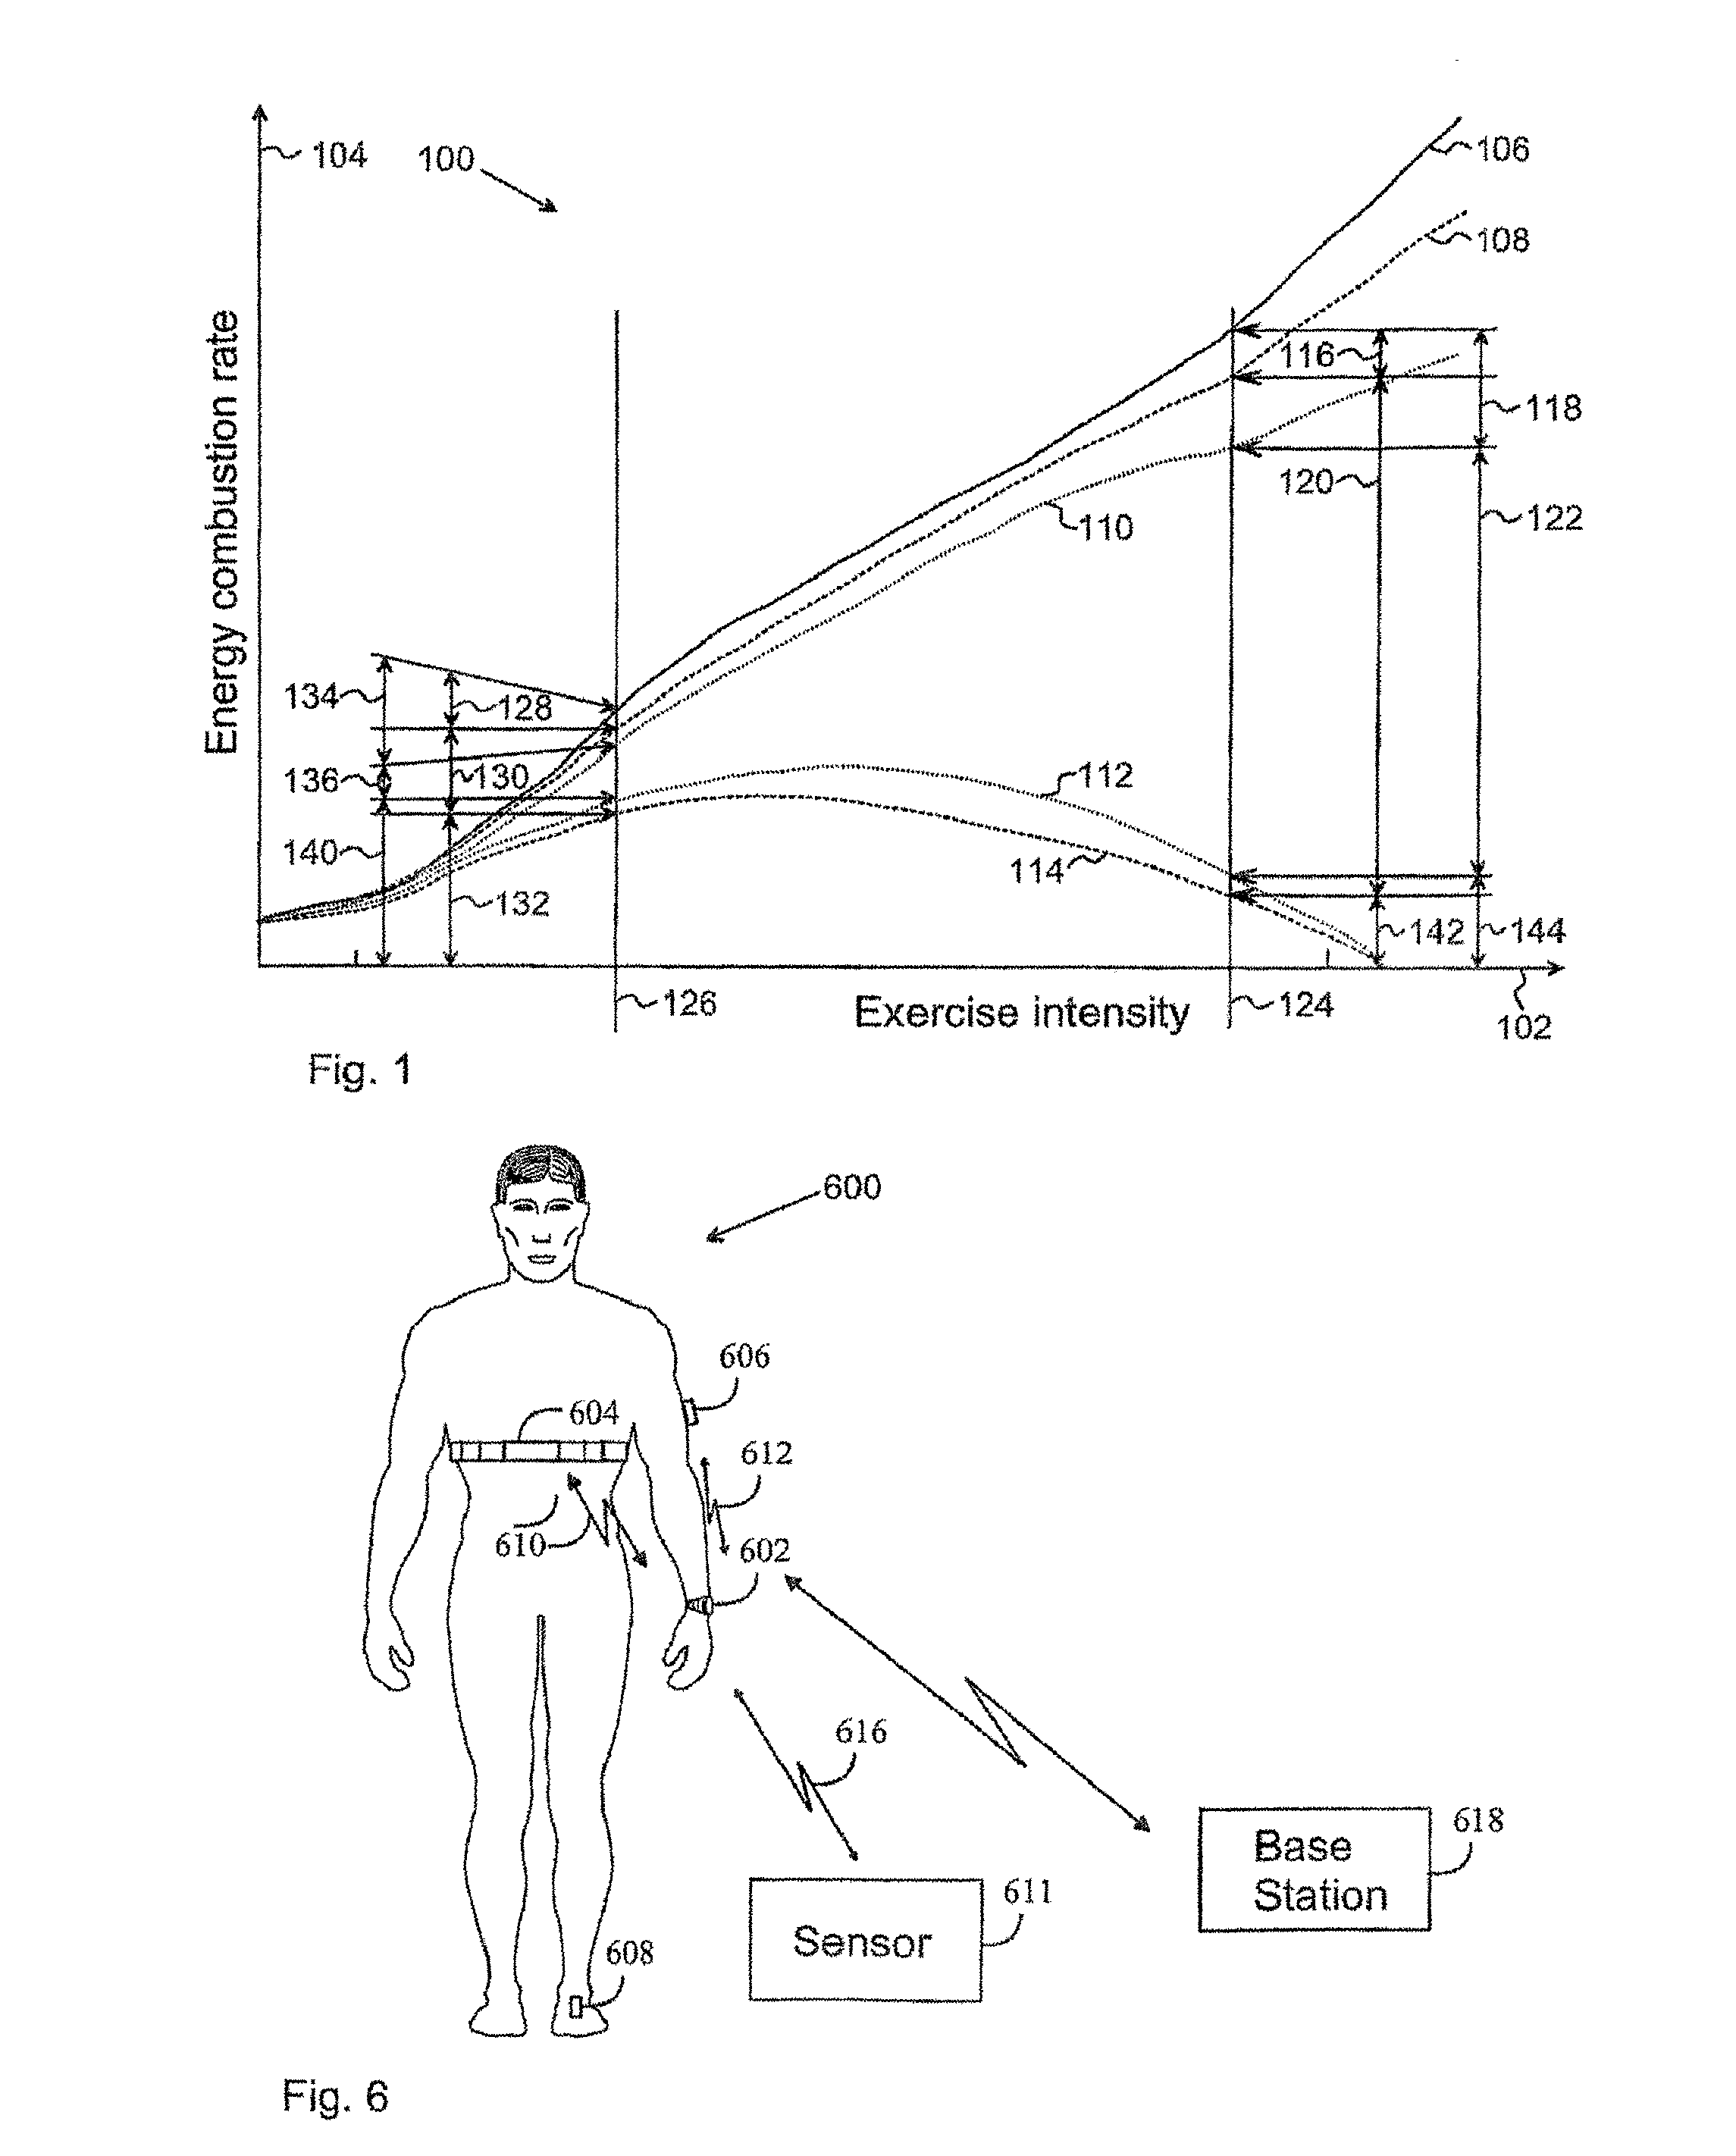 Apparatus for Metabolic Training Load, Mechanical Stimulus, and Recovery Time Calculation